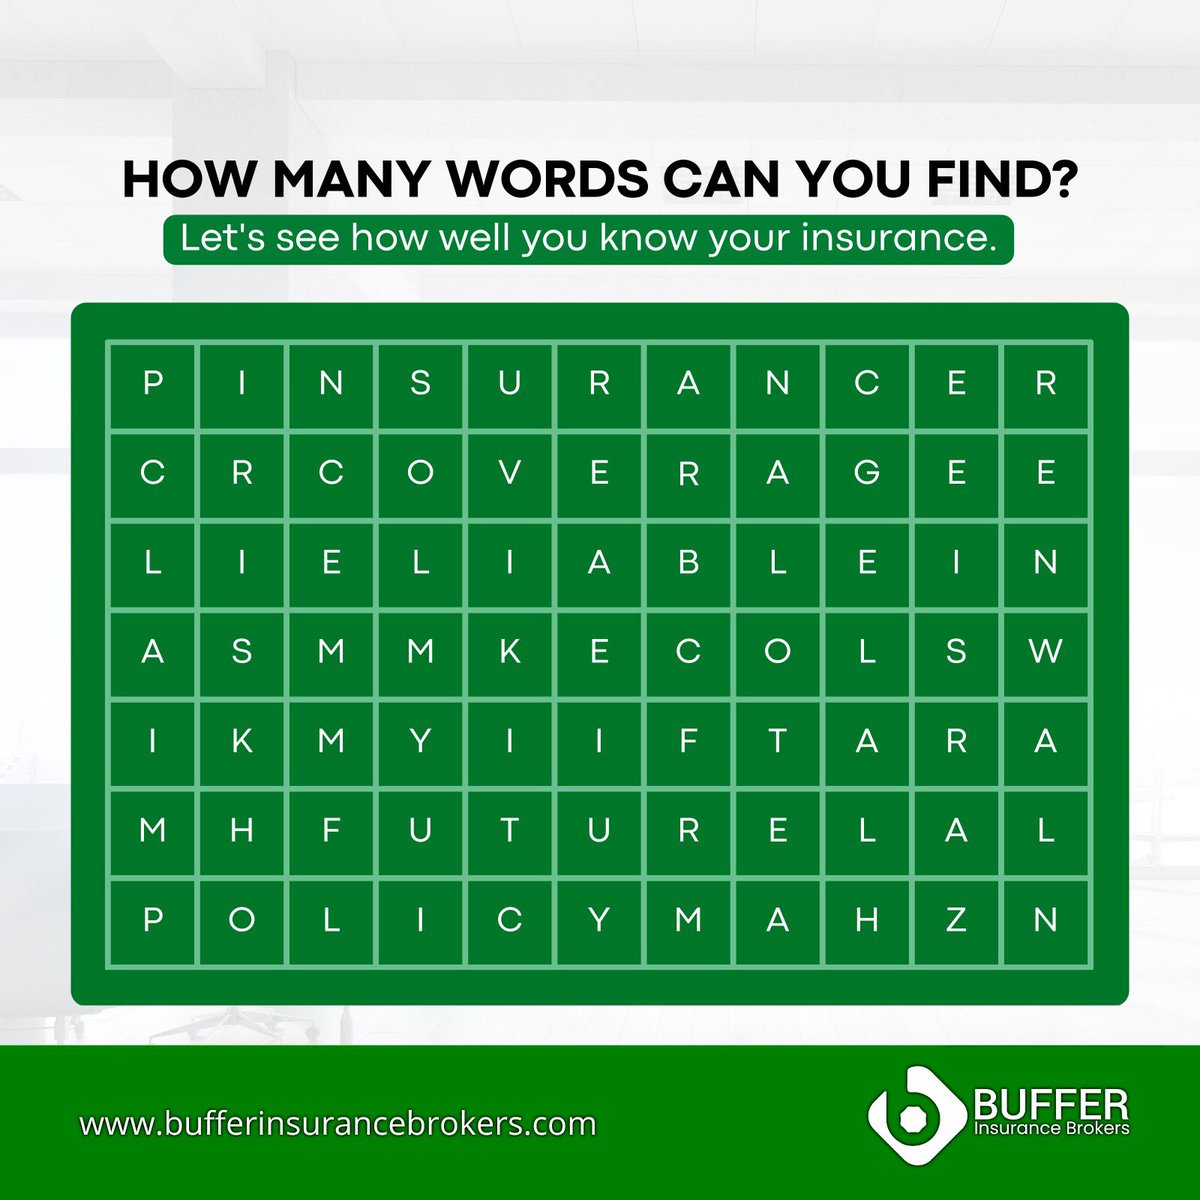 What words relating to insurance can you find?
Comment your searches below in the comment section. Let's go!

#InsurancePuzzle #RightFitInsurance #InsuranceHelp #PuzzleSolving #InsuranceAdvice #InsuranceExperts
#InsuranceOptions #InsuranceSolutions #Insurance